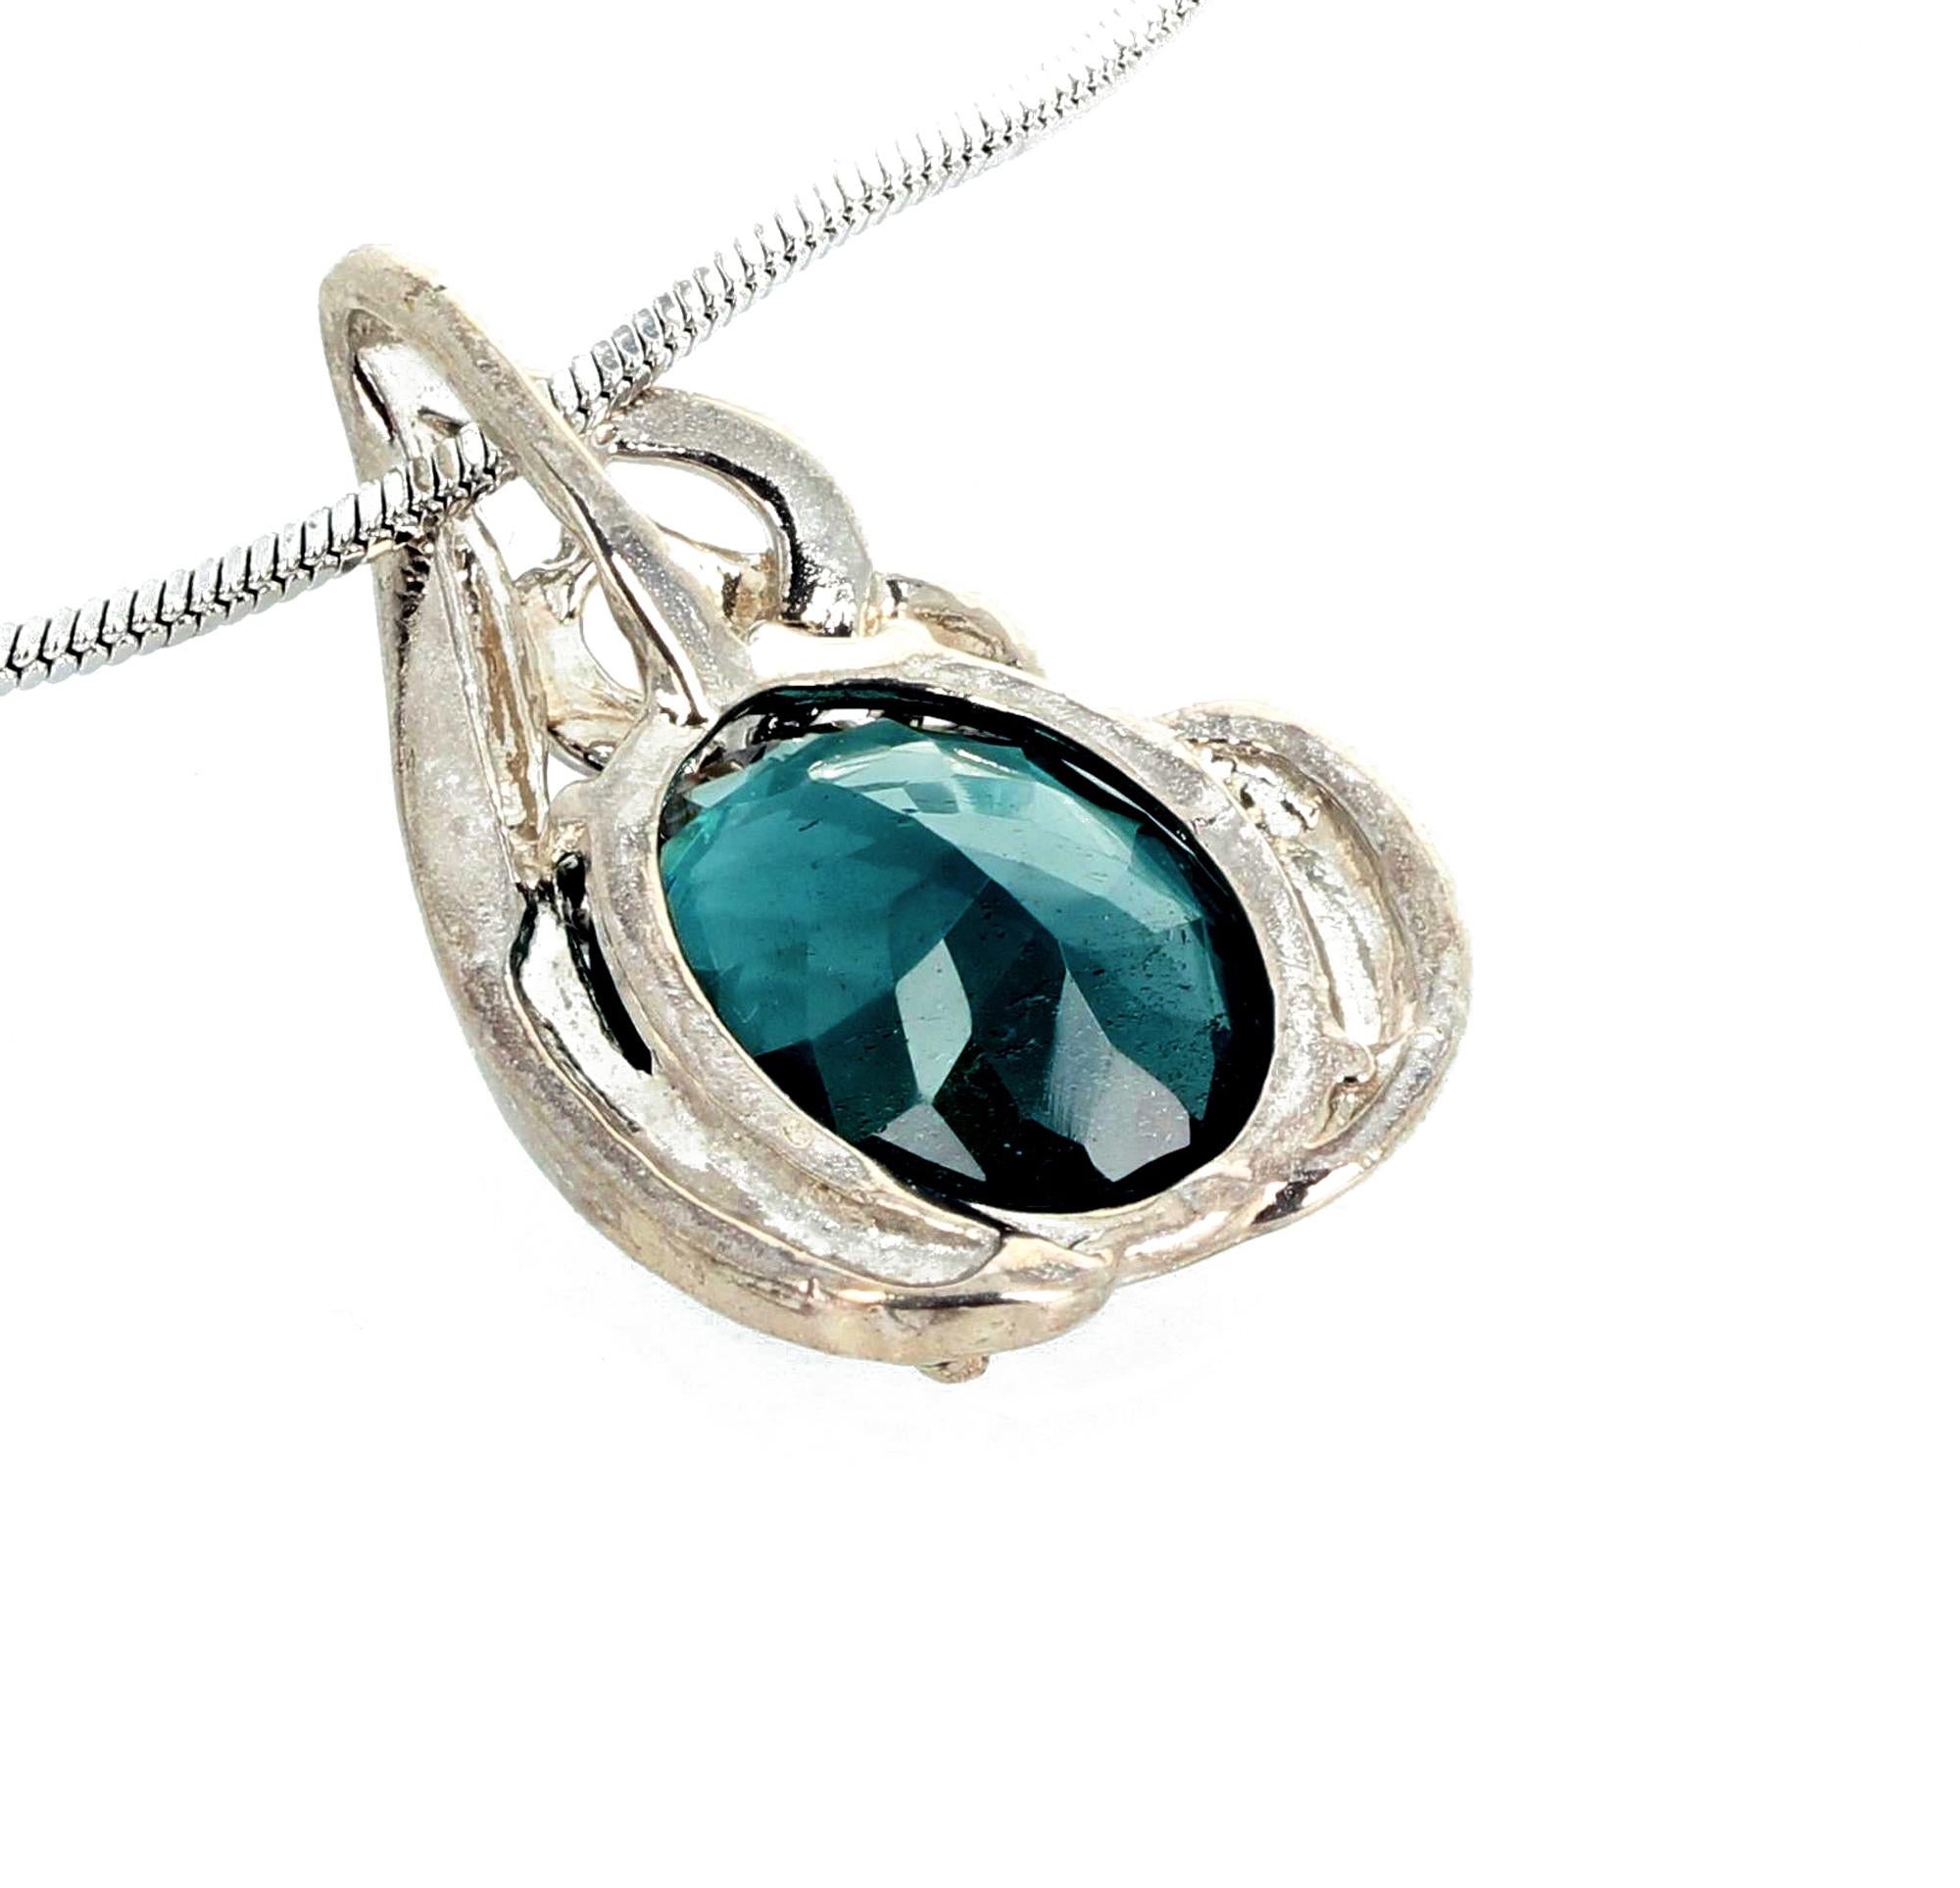 AJD Stunning 5.5 Cts Bluegreen Glittering Tourmaline Sterling Silver Pendant  For Sale 1